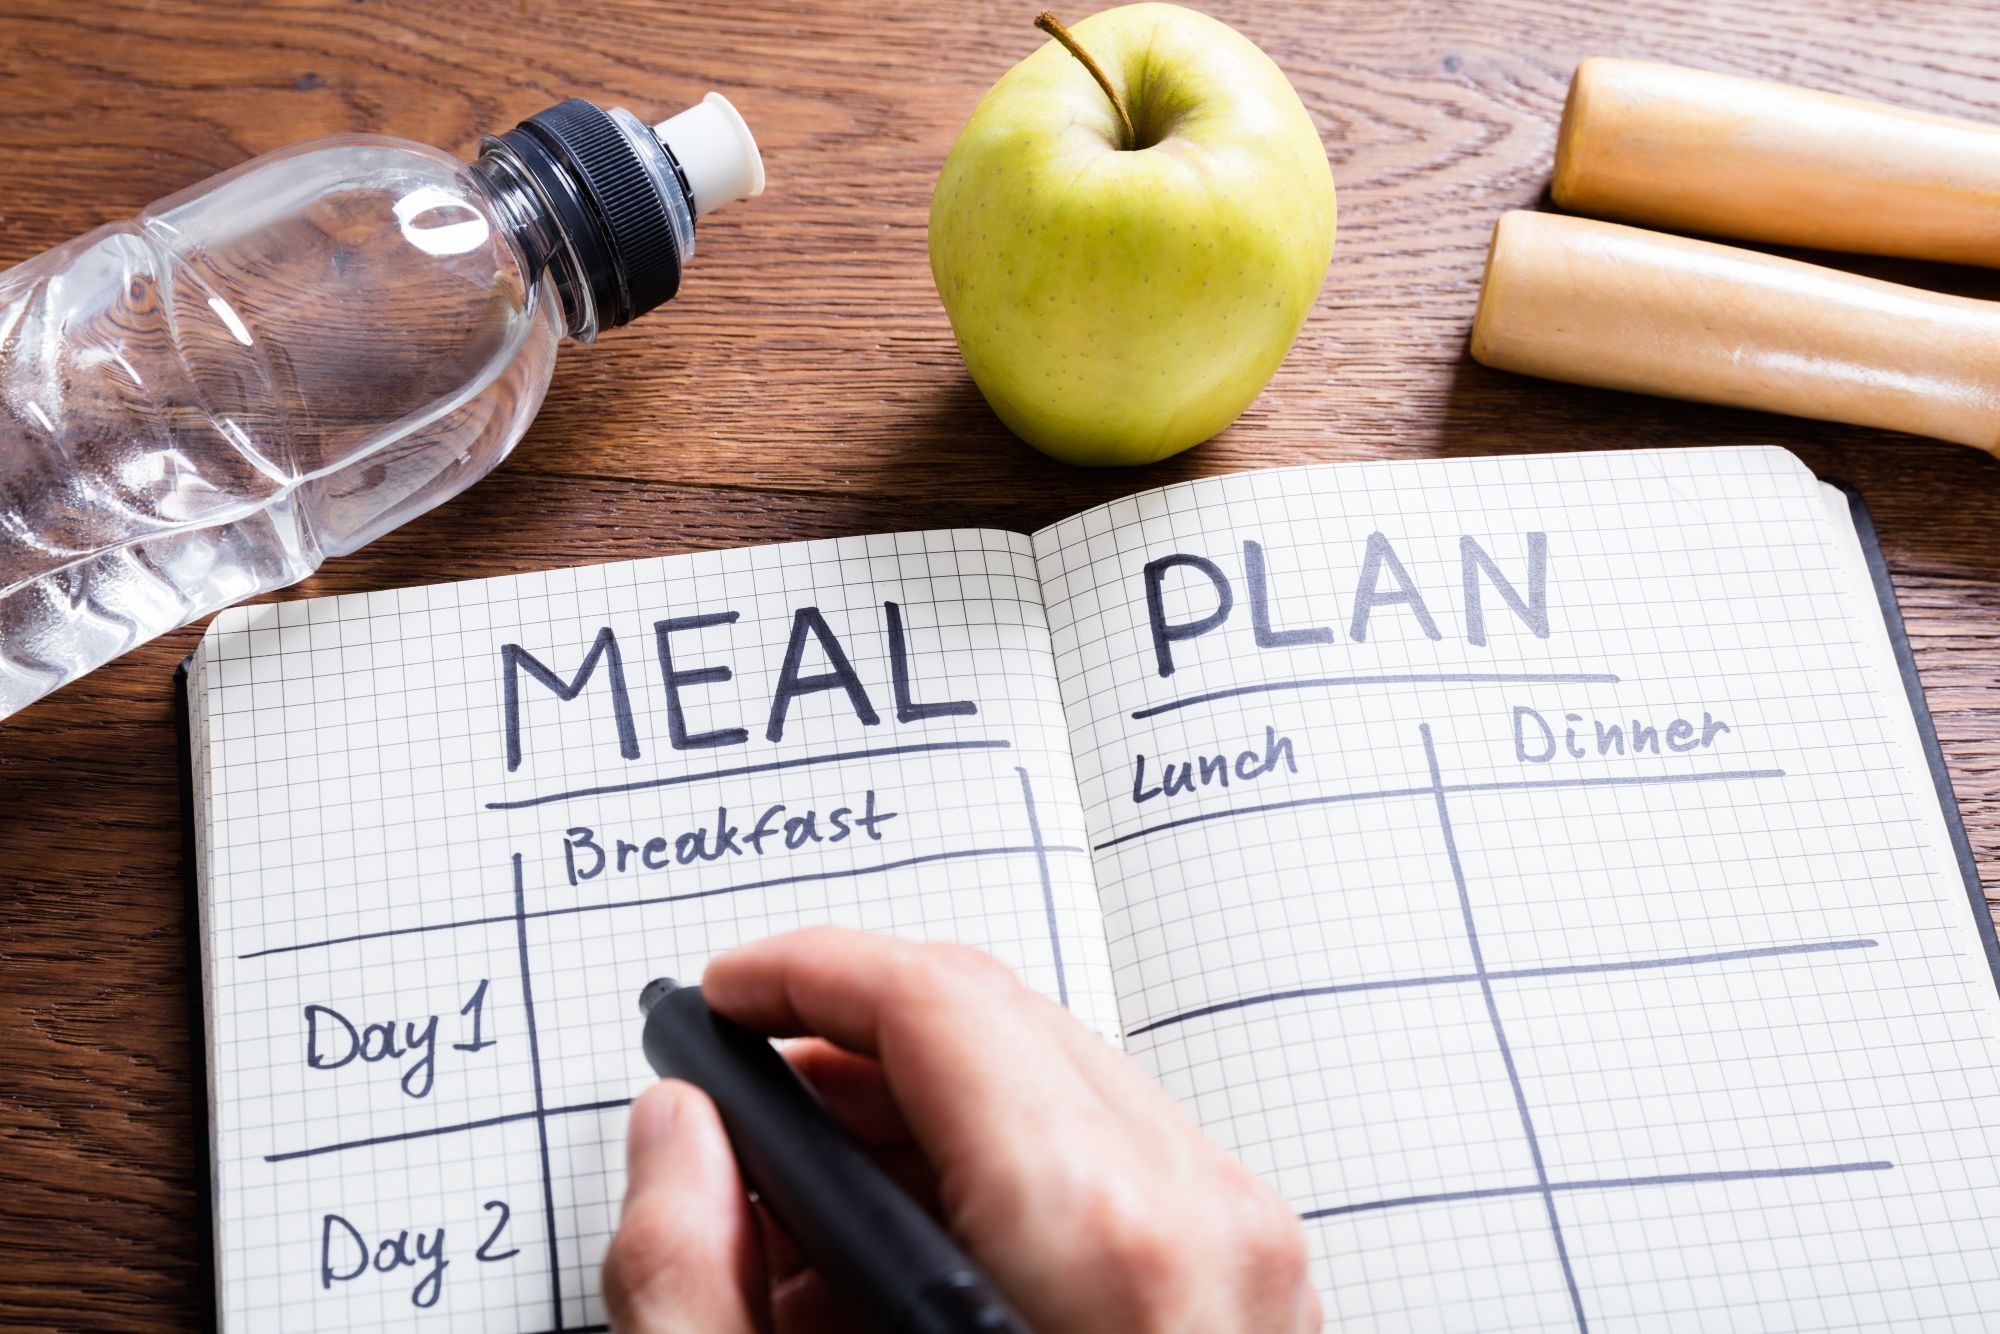 meal planner notebook with water bottle and apple